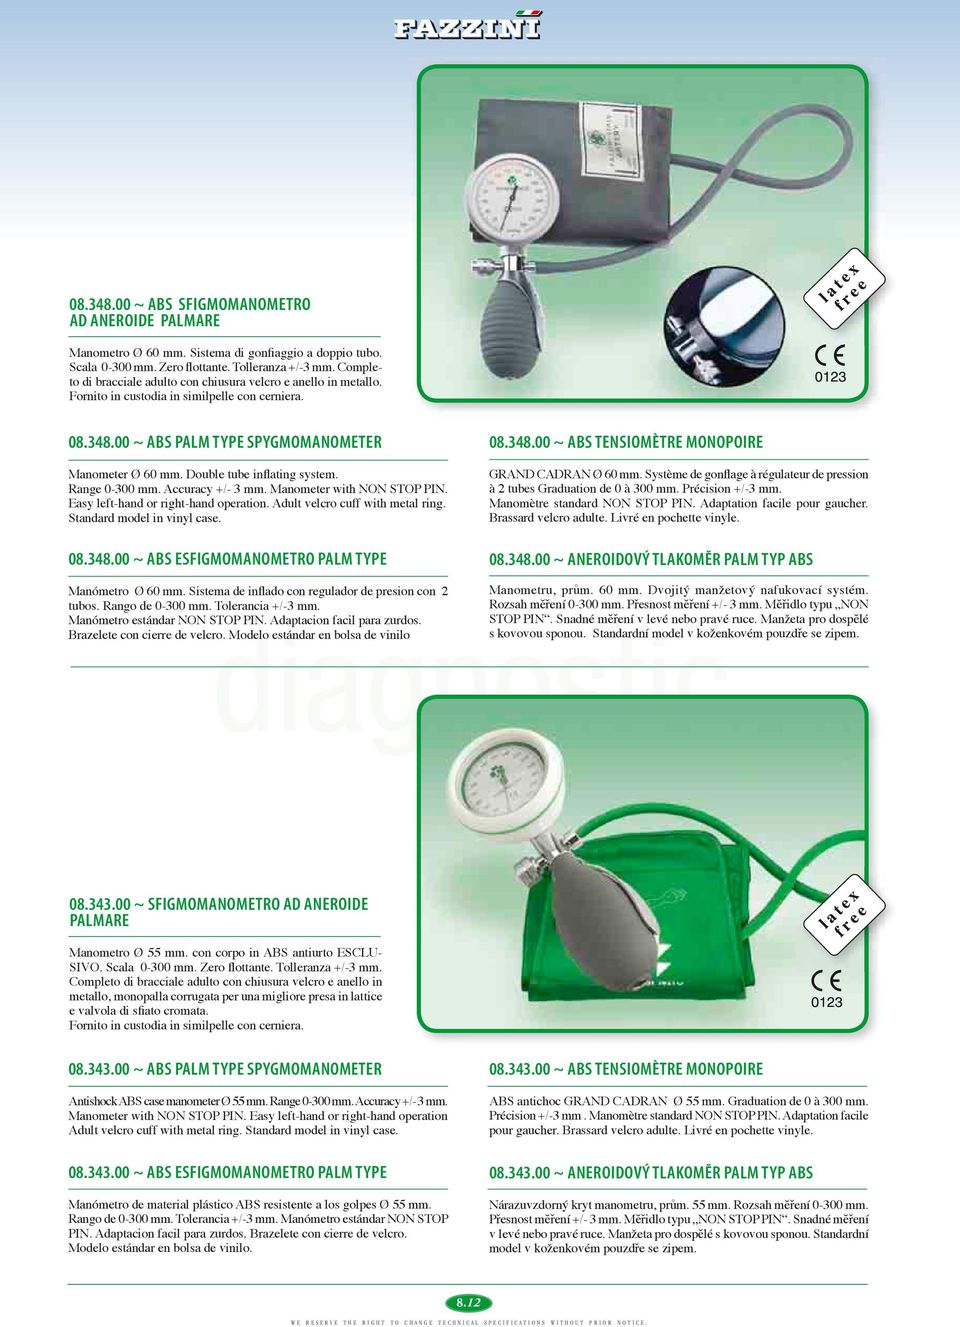 Double tube inflating system. Range 0-300 mm. Accuracy +/- 3 mm. Manometer with NON STOP PIN. Easy left-hand or right-hand operation. Adult velcro cuff with metal ring. Standard model in vinyl case.